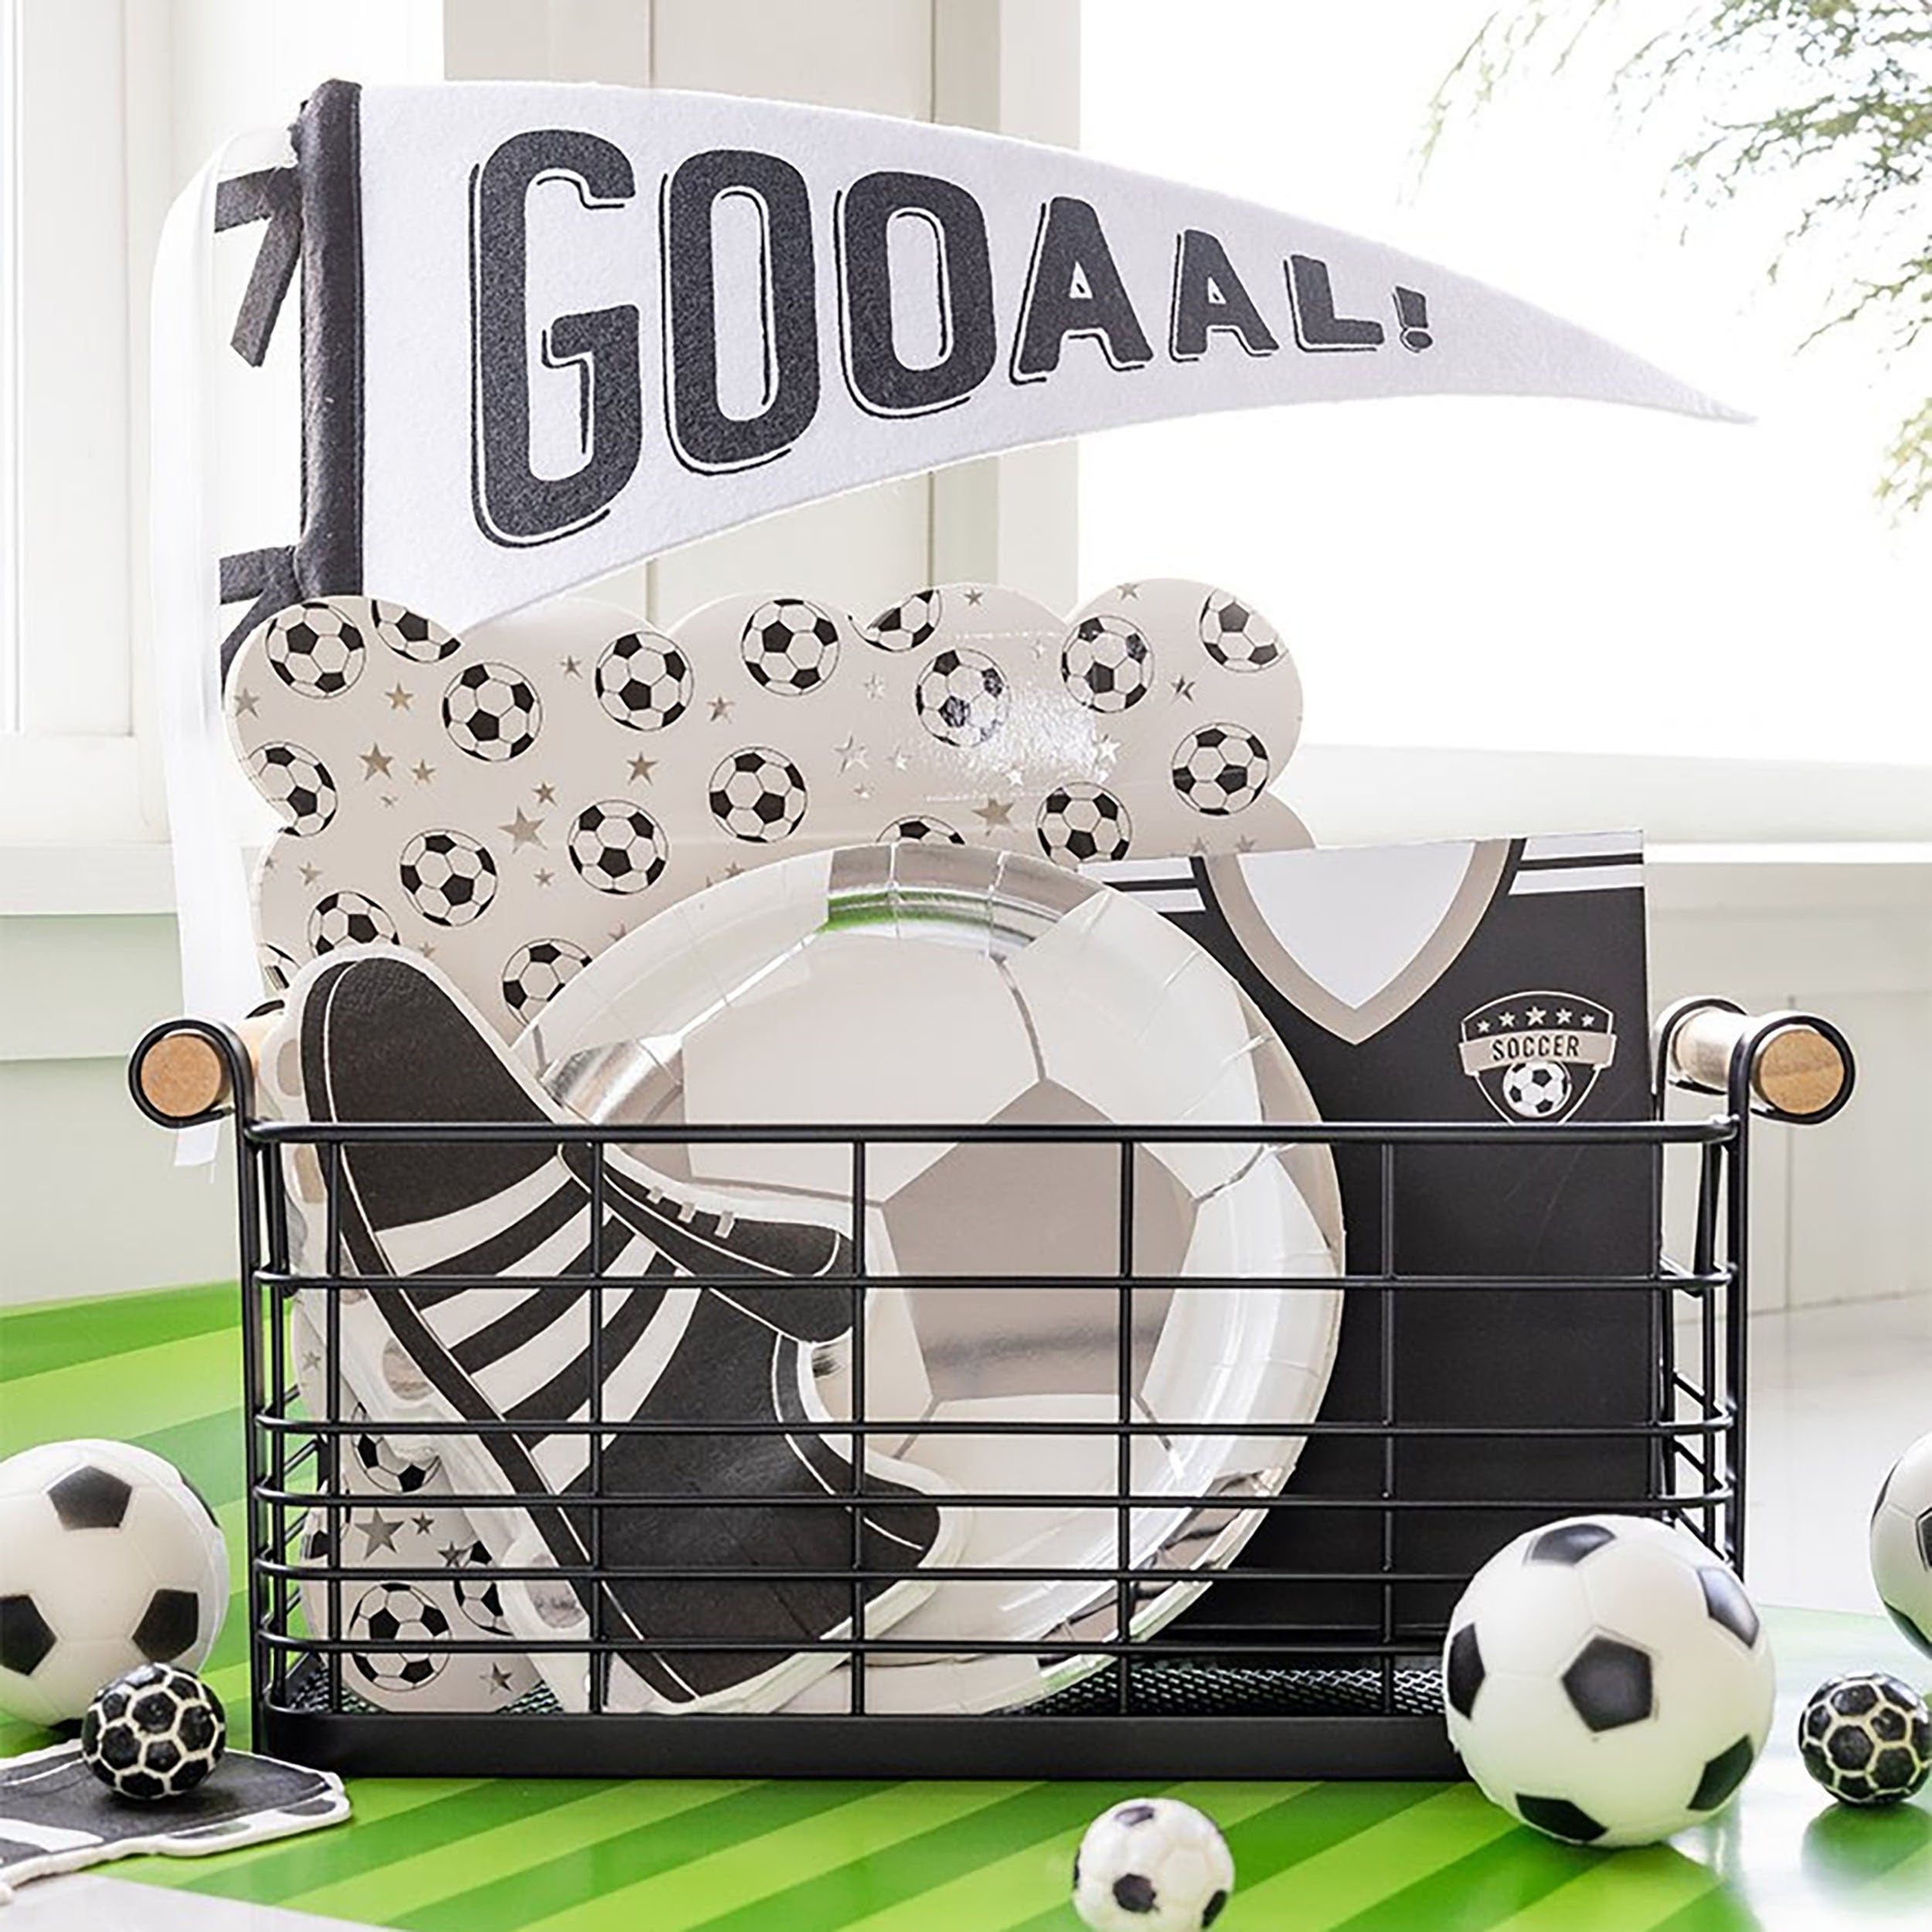 Soccer Party Supplies, Plates, Napkins, Party Favors, Goal Pennant Flag